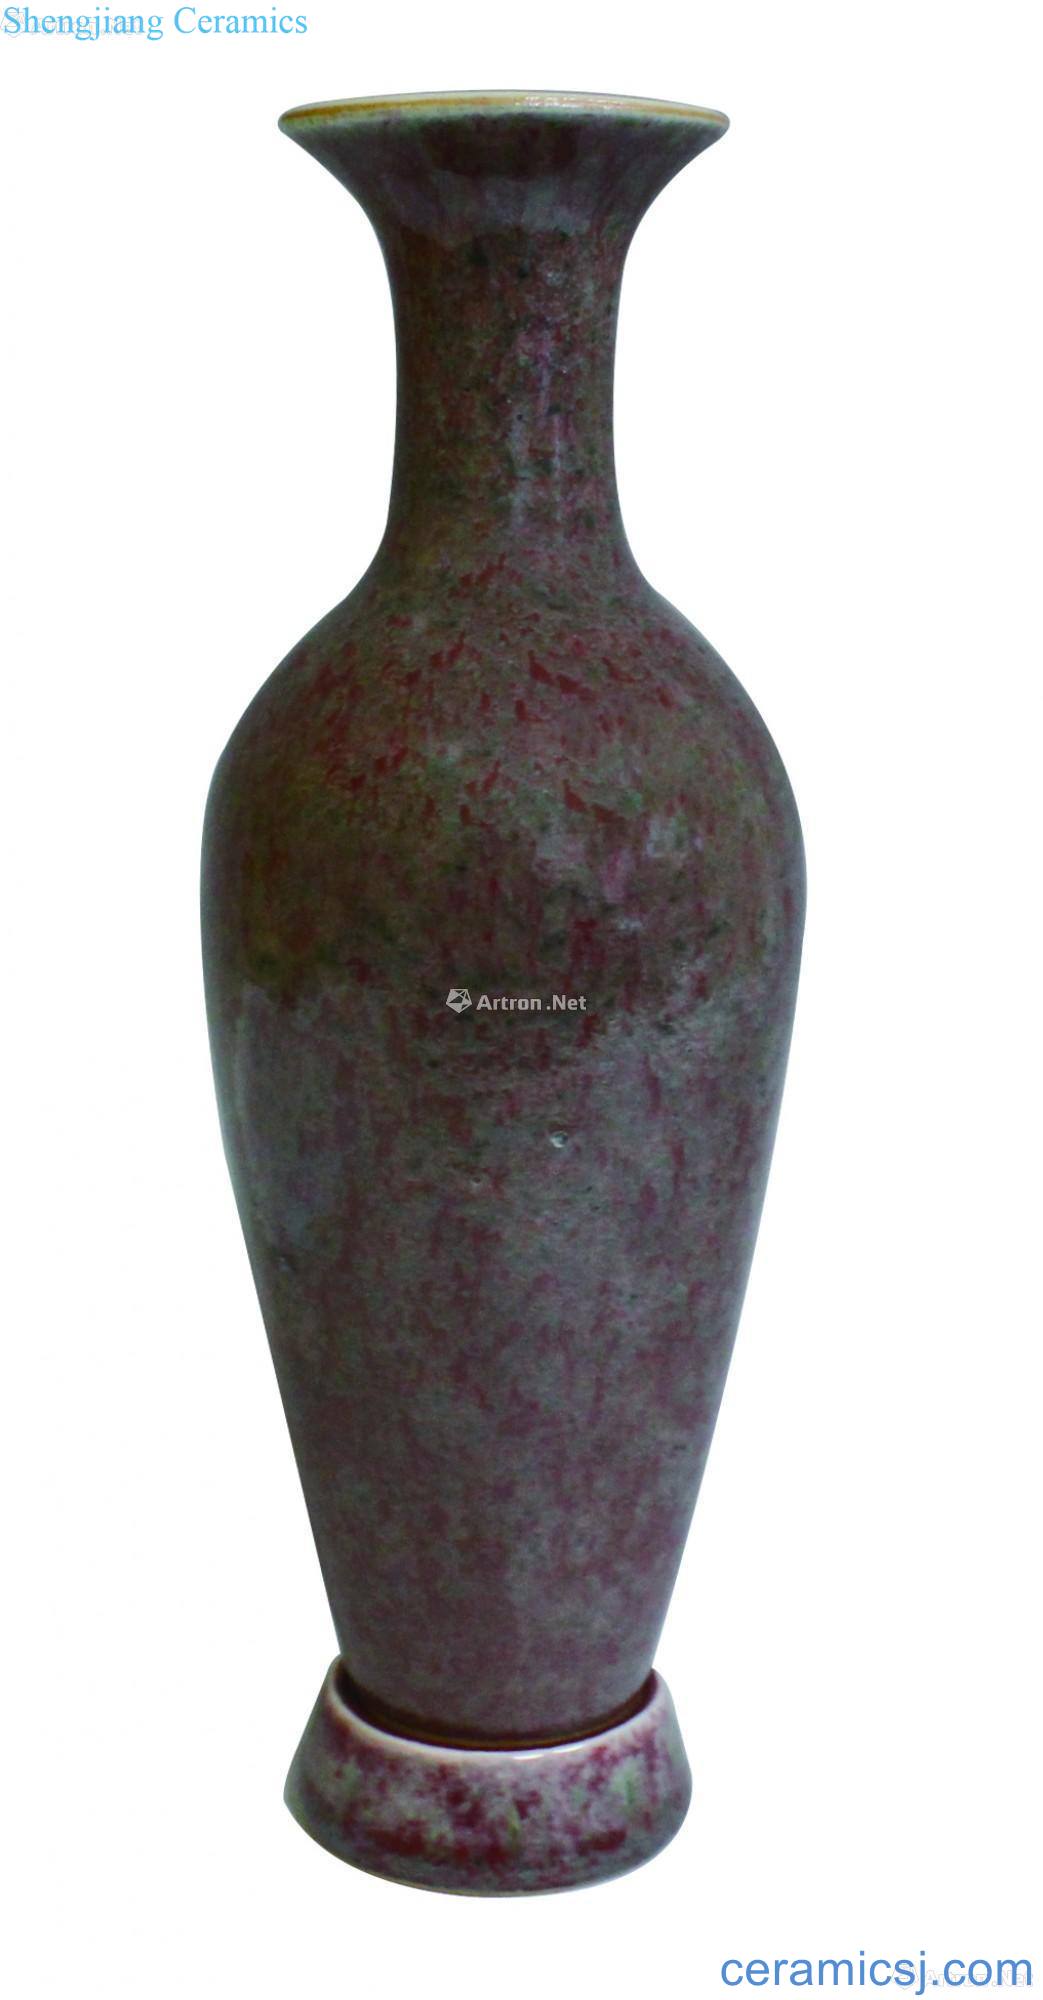 Cowpea red willow bottle